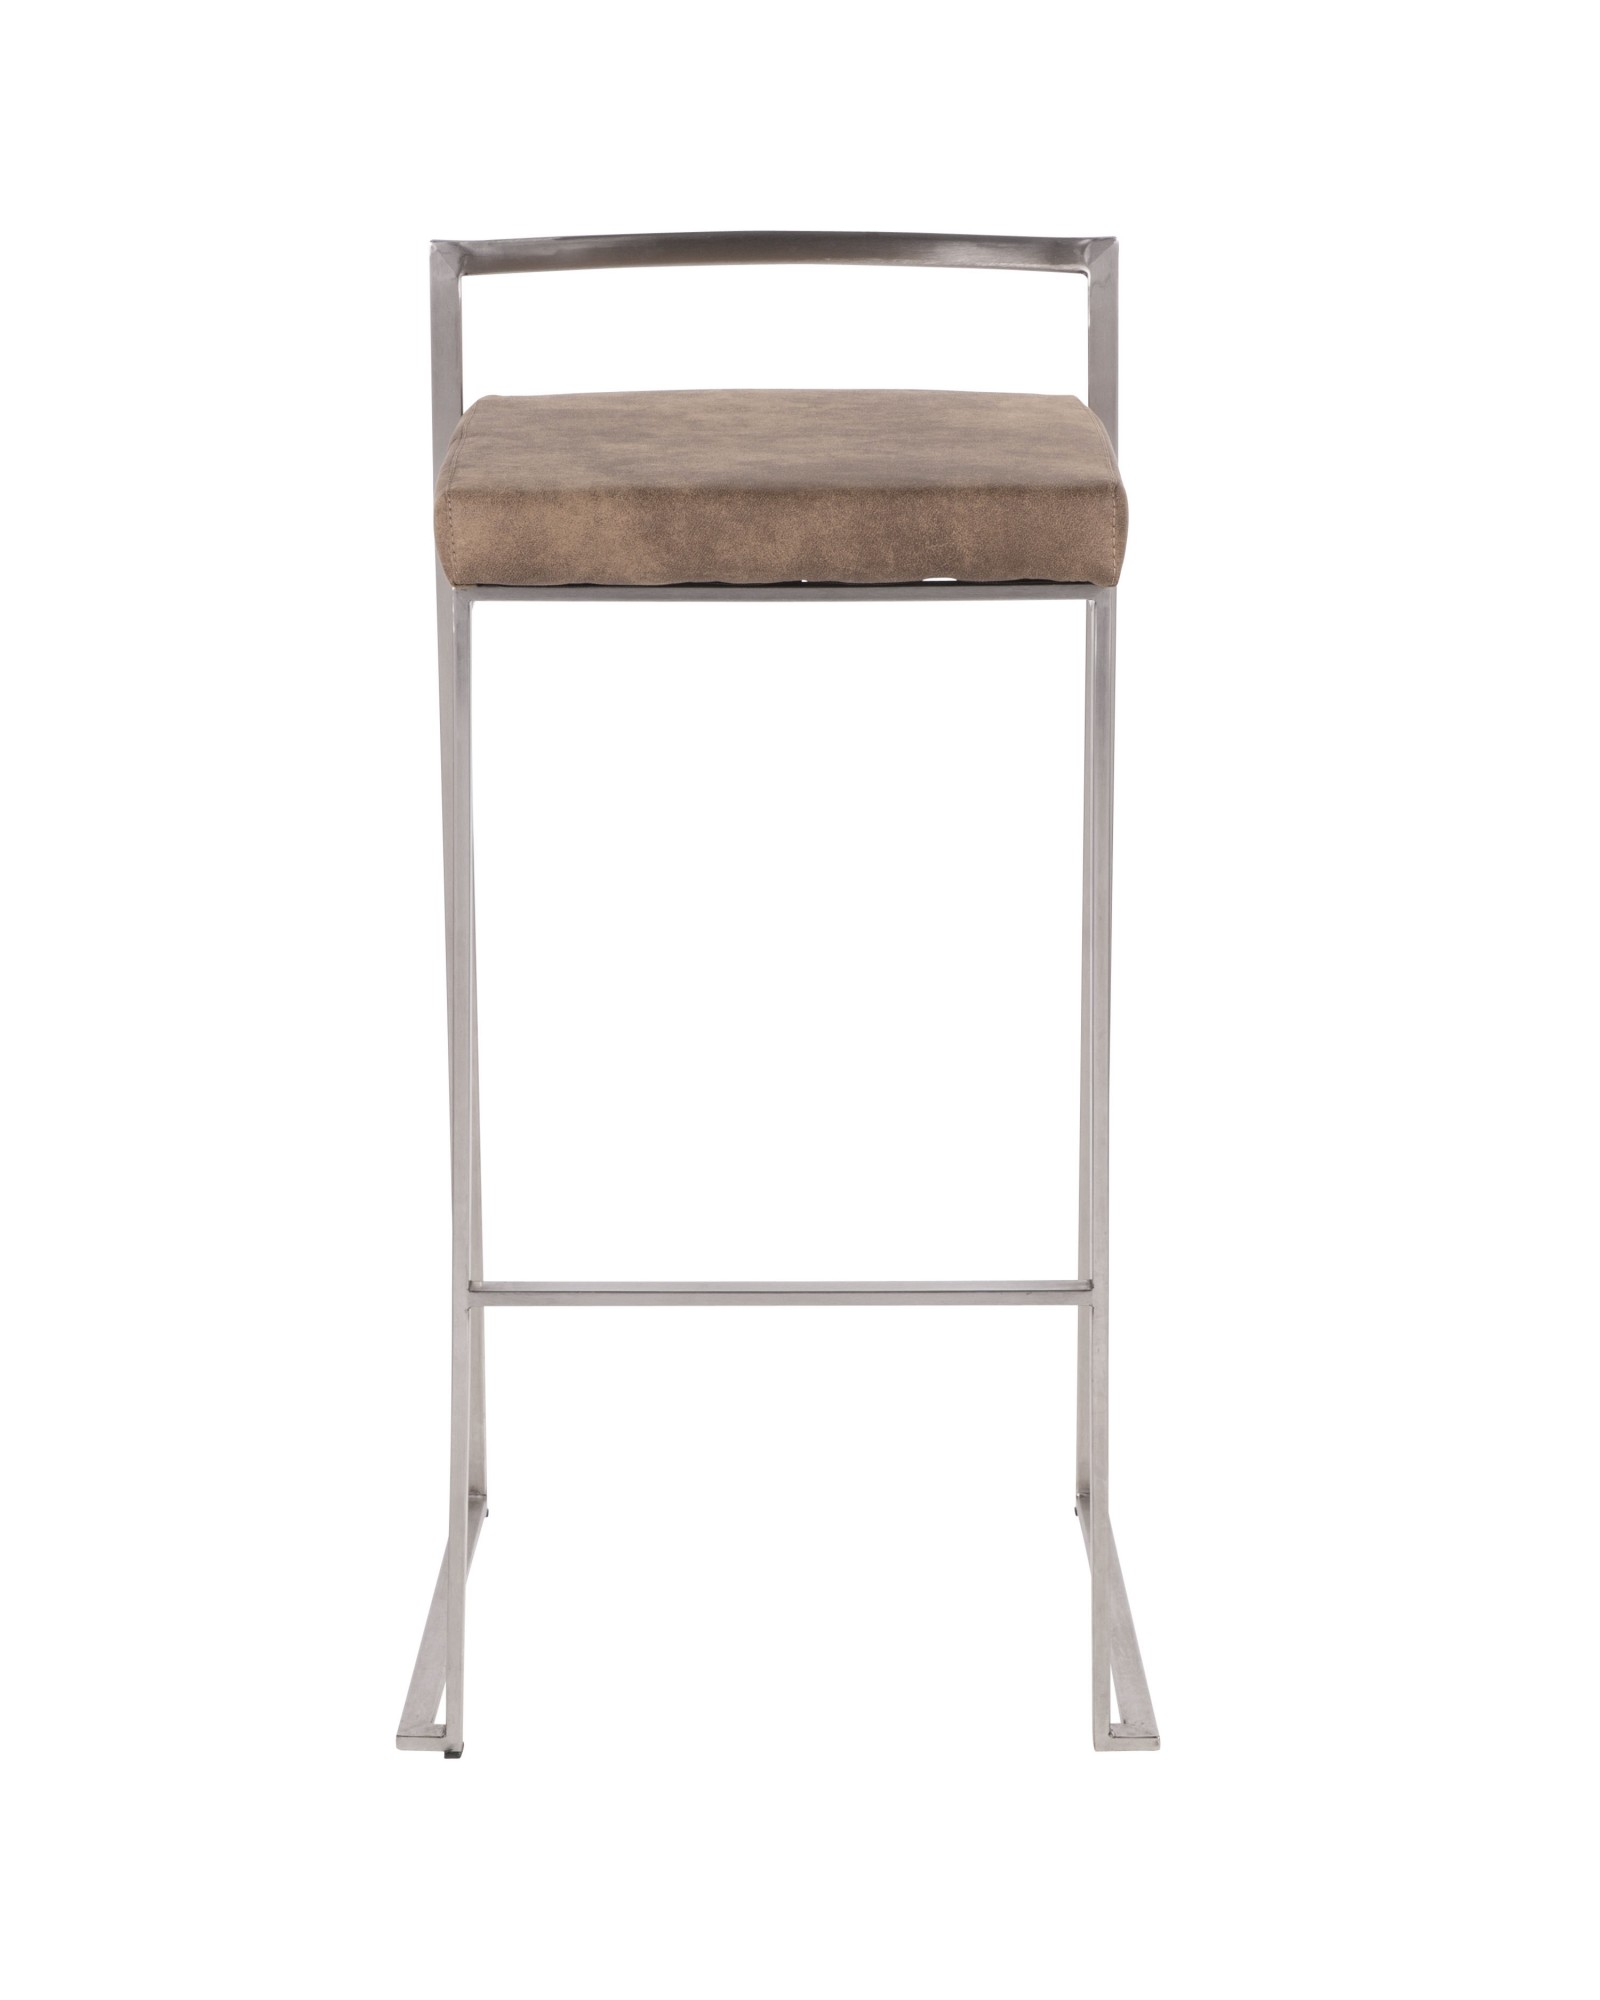 Fuji Contemporary Stackable Barstool in Stainless Steel with Brown Cowboy Fabric Cushion - Set of 2